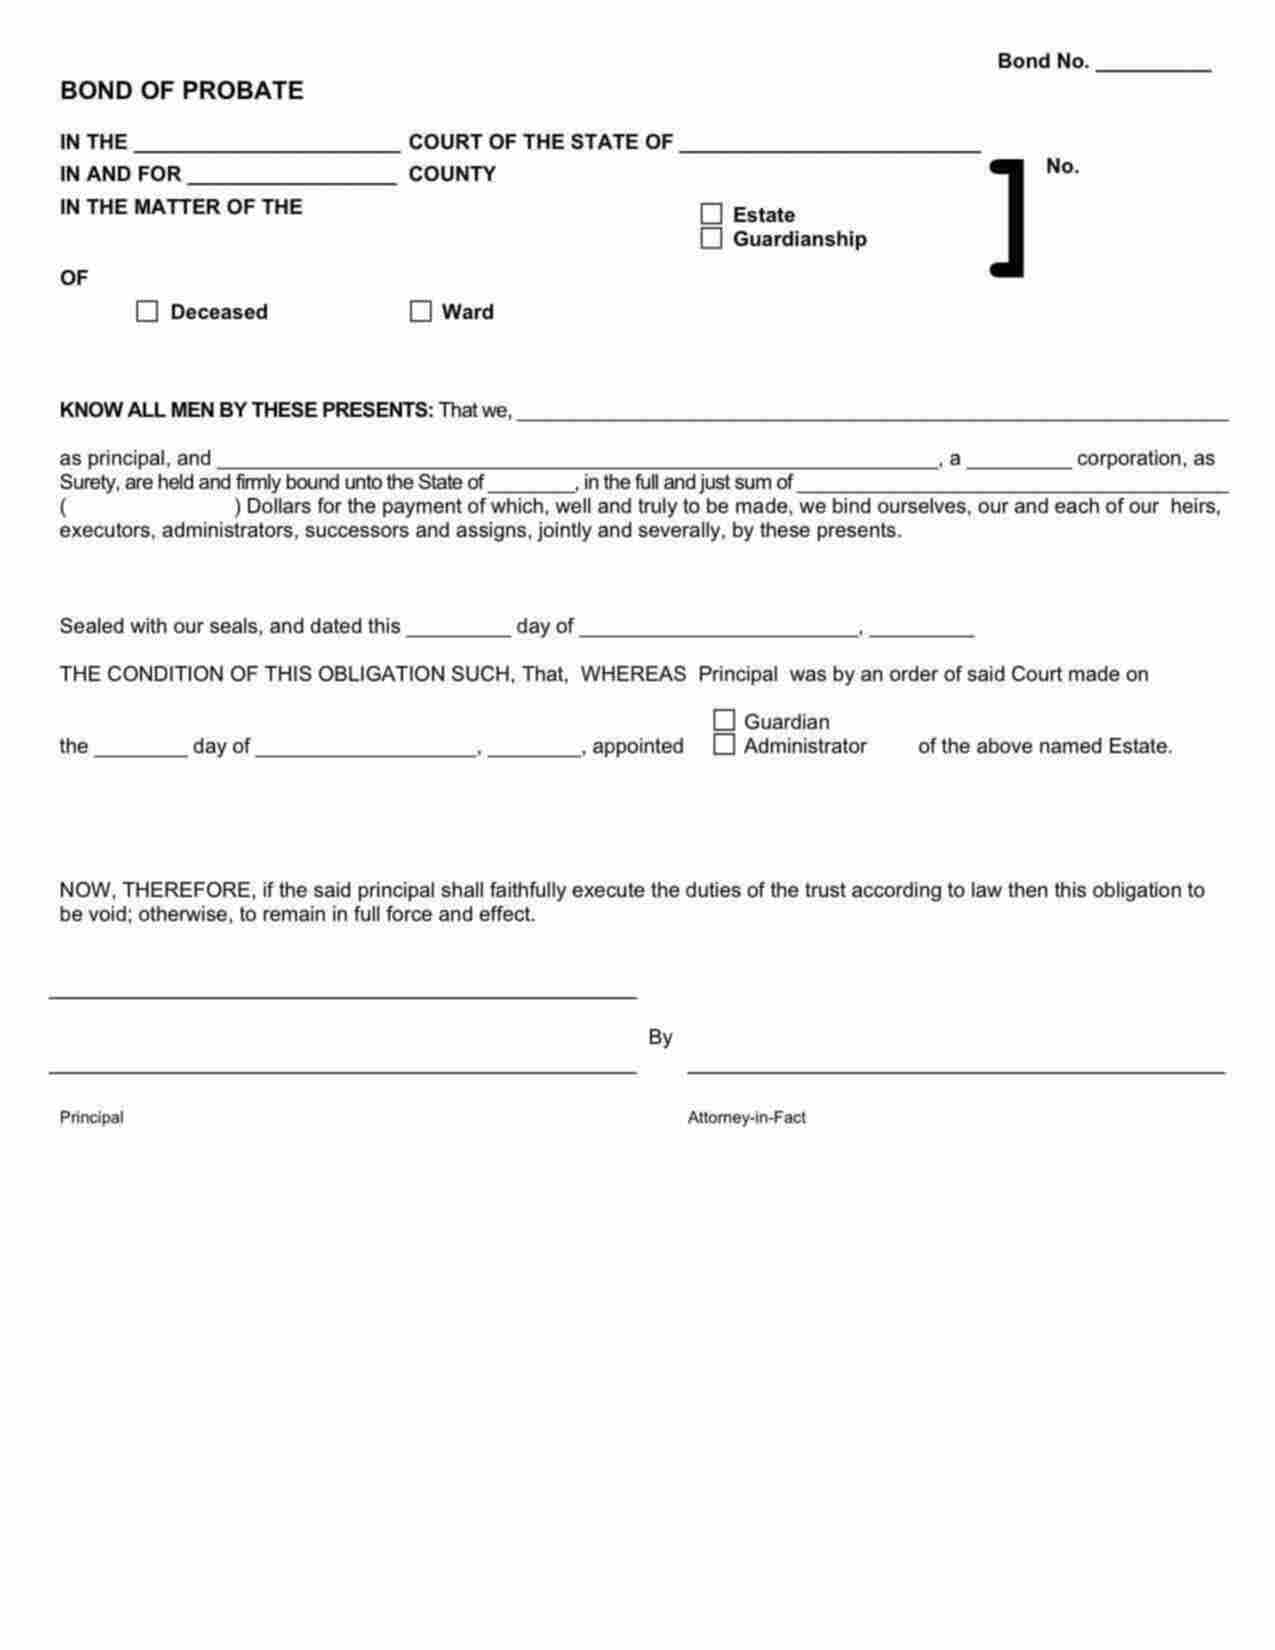 Tennessee Conservator/Guardian Bond Form